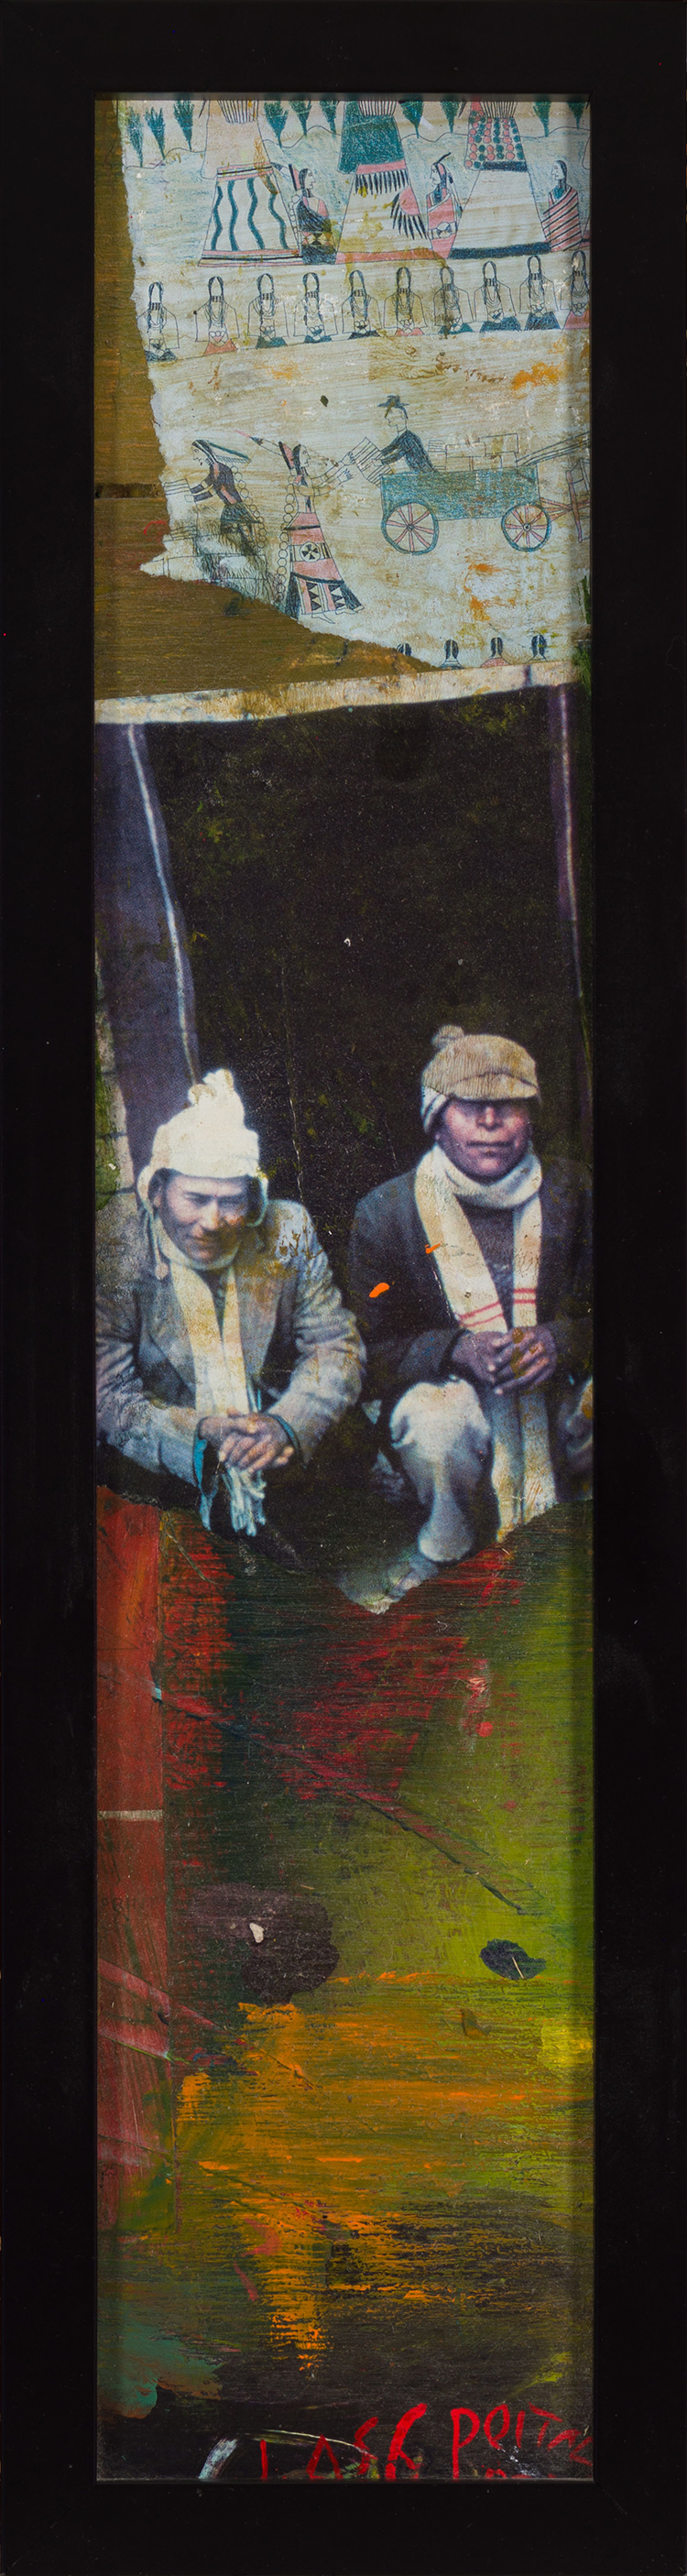 Untitled - Two Native Men by Jane Ash Poitras